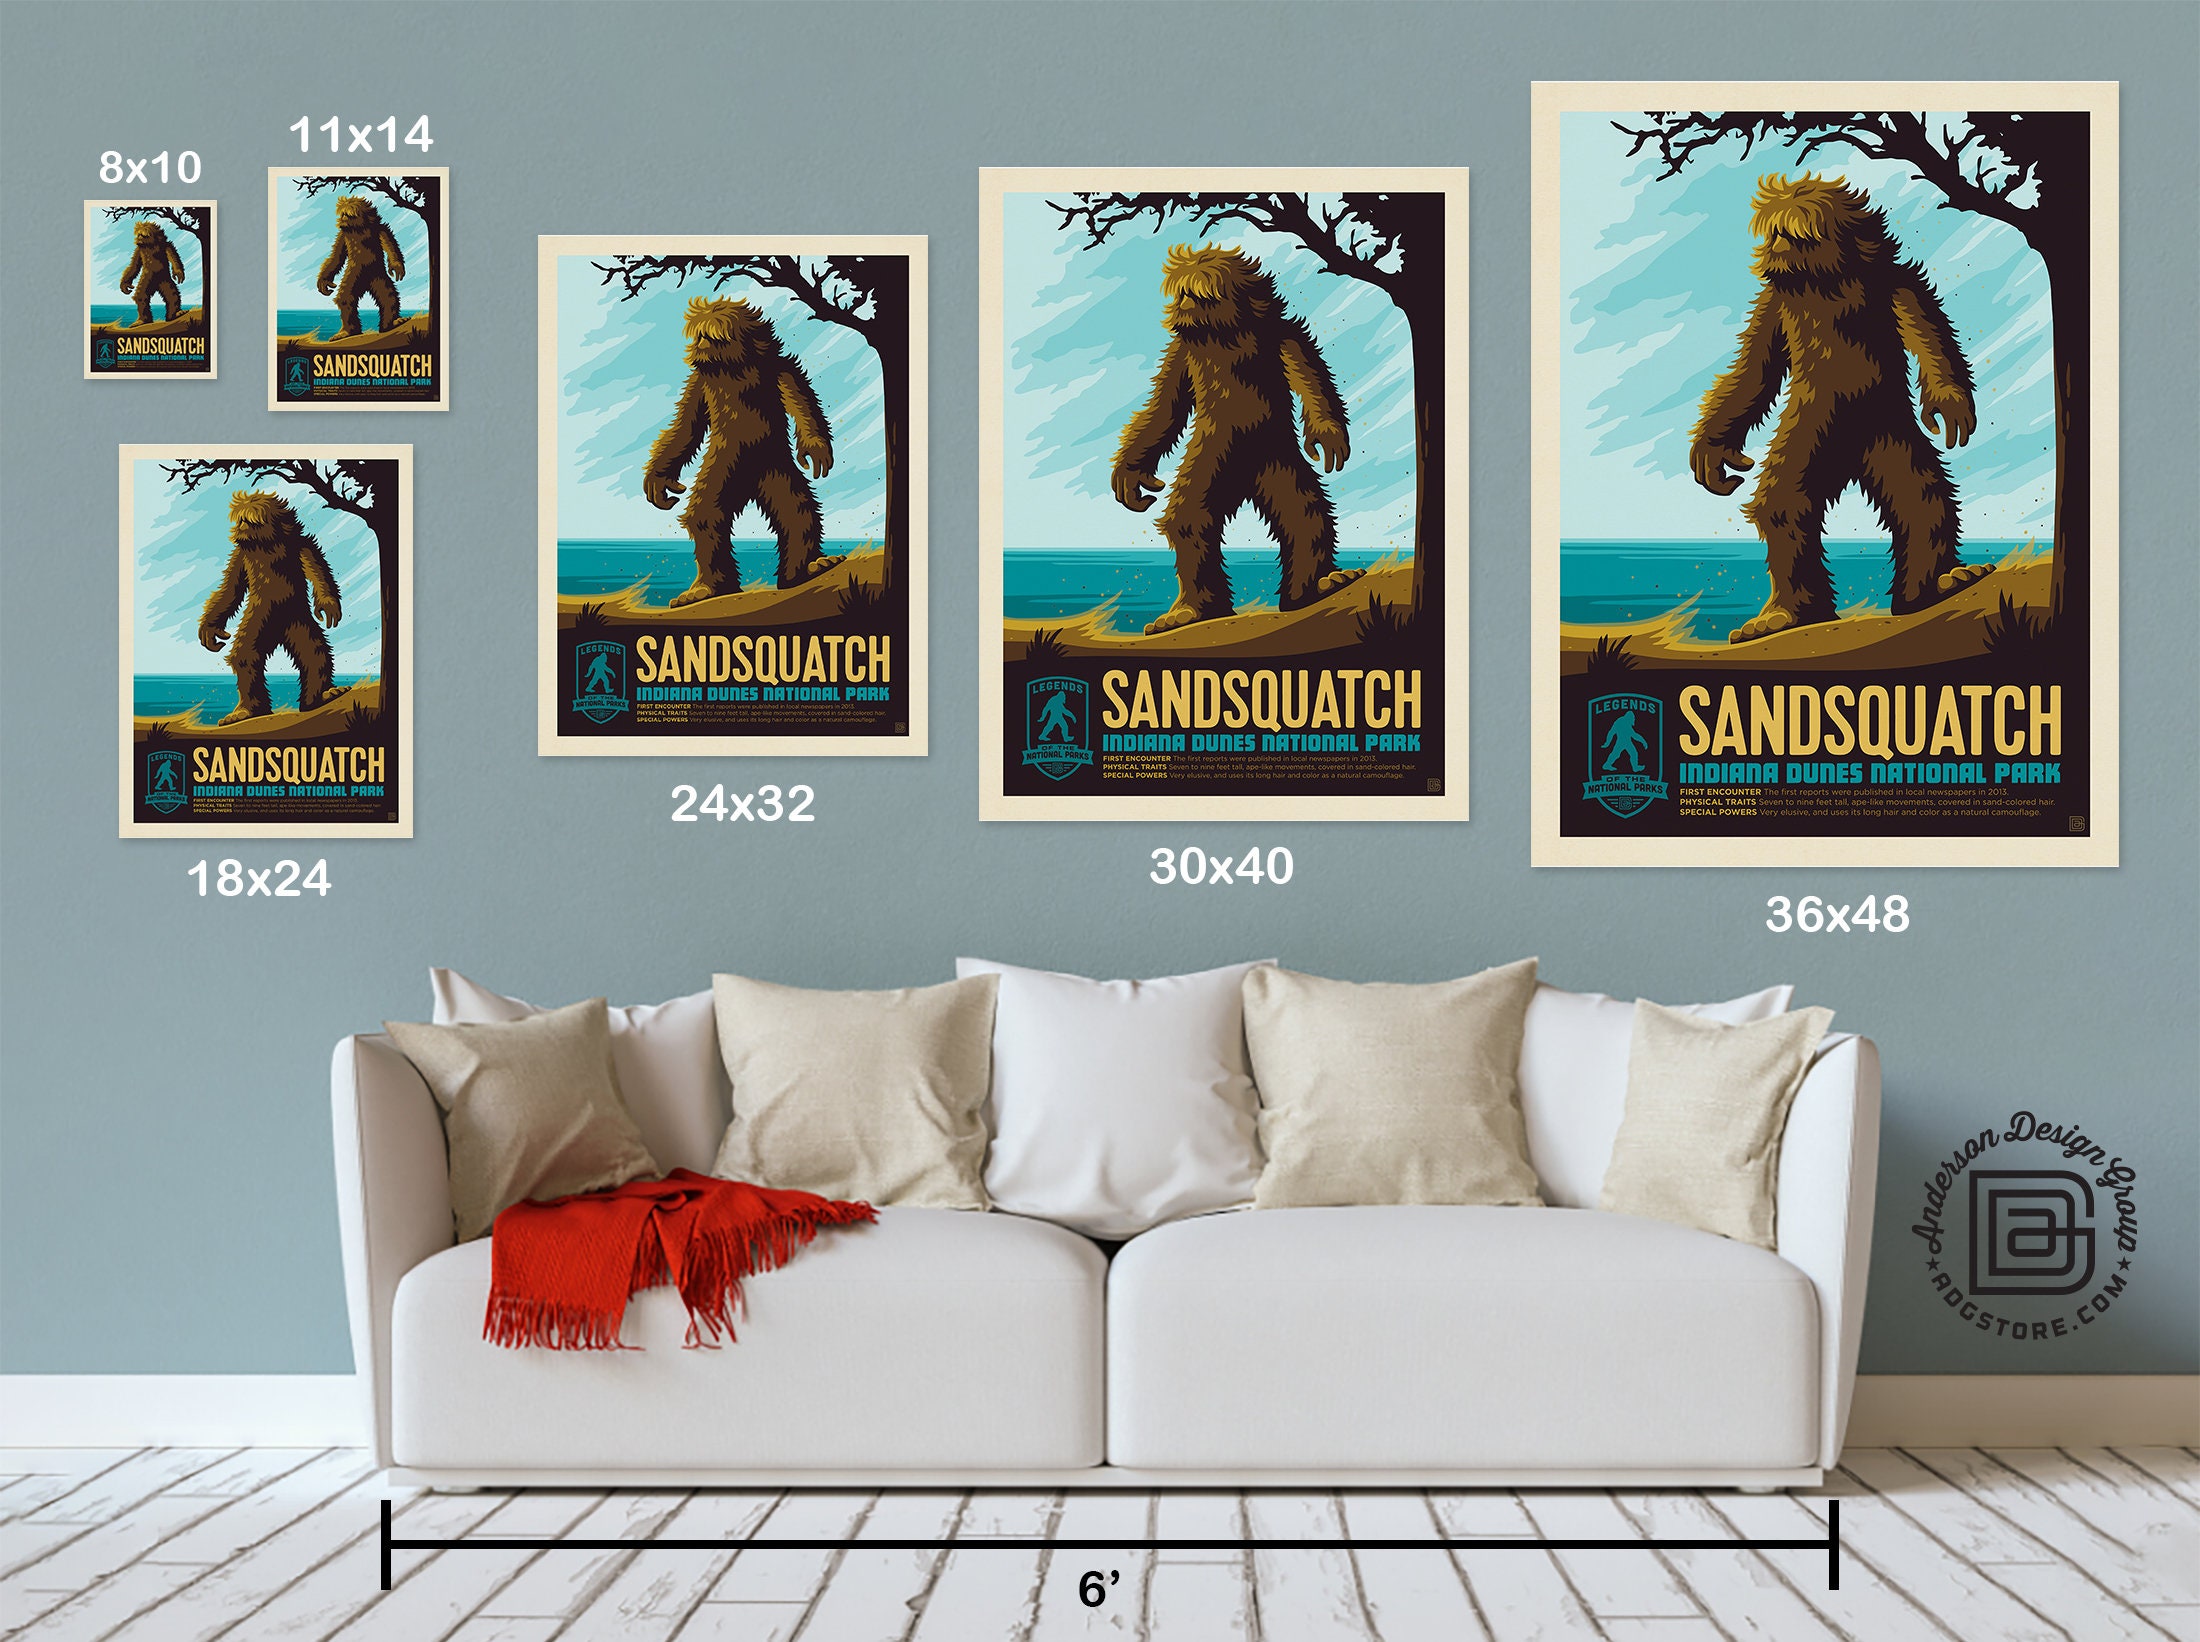 18x18 Throw Pillow: Legends Of The National Parks-Bigfoot - Anderson  Design Group